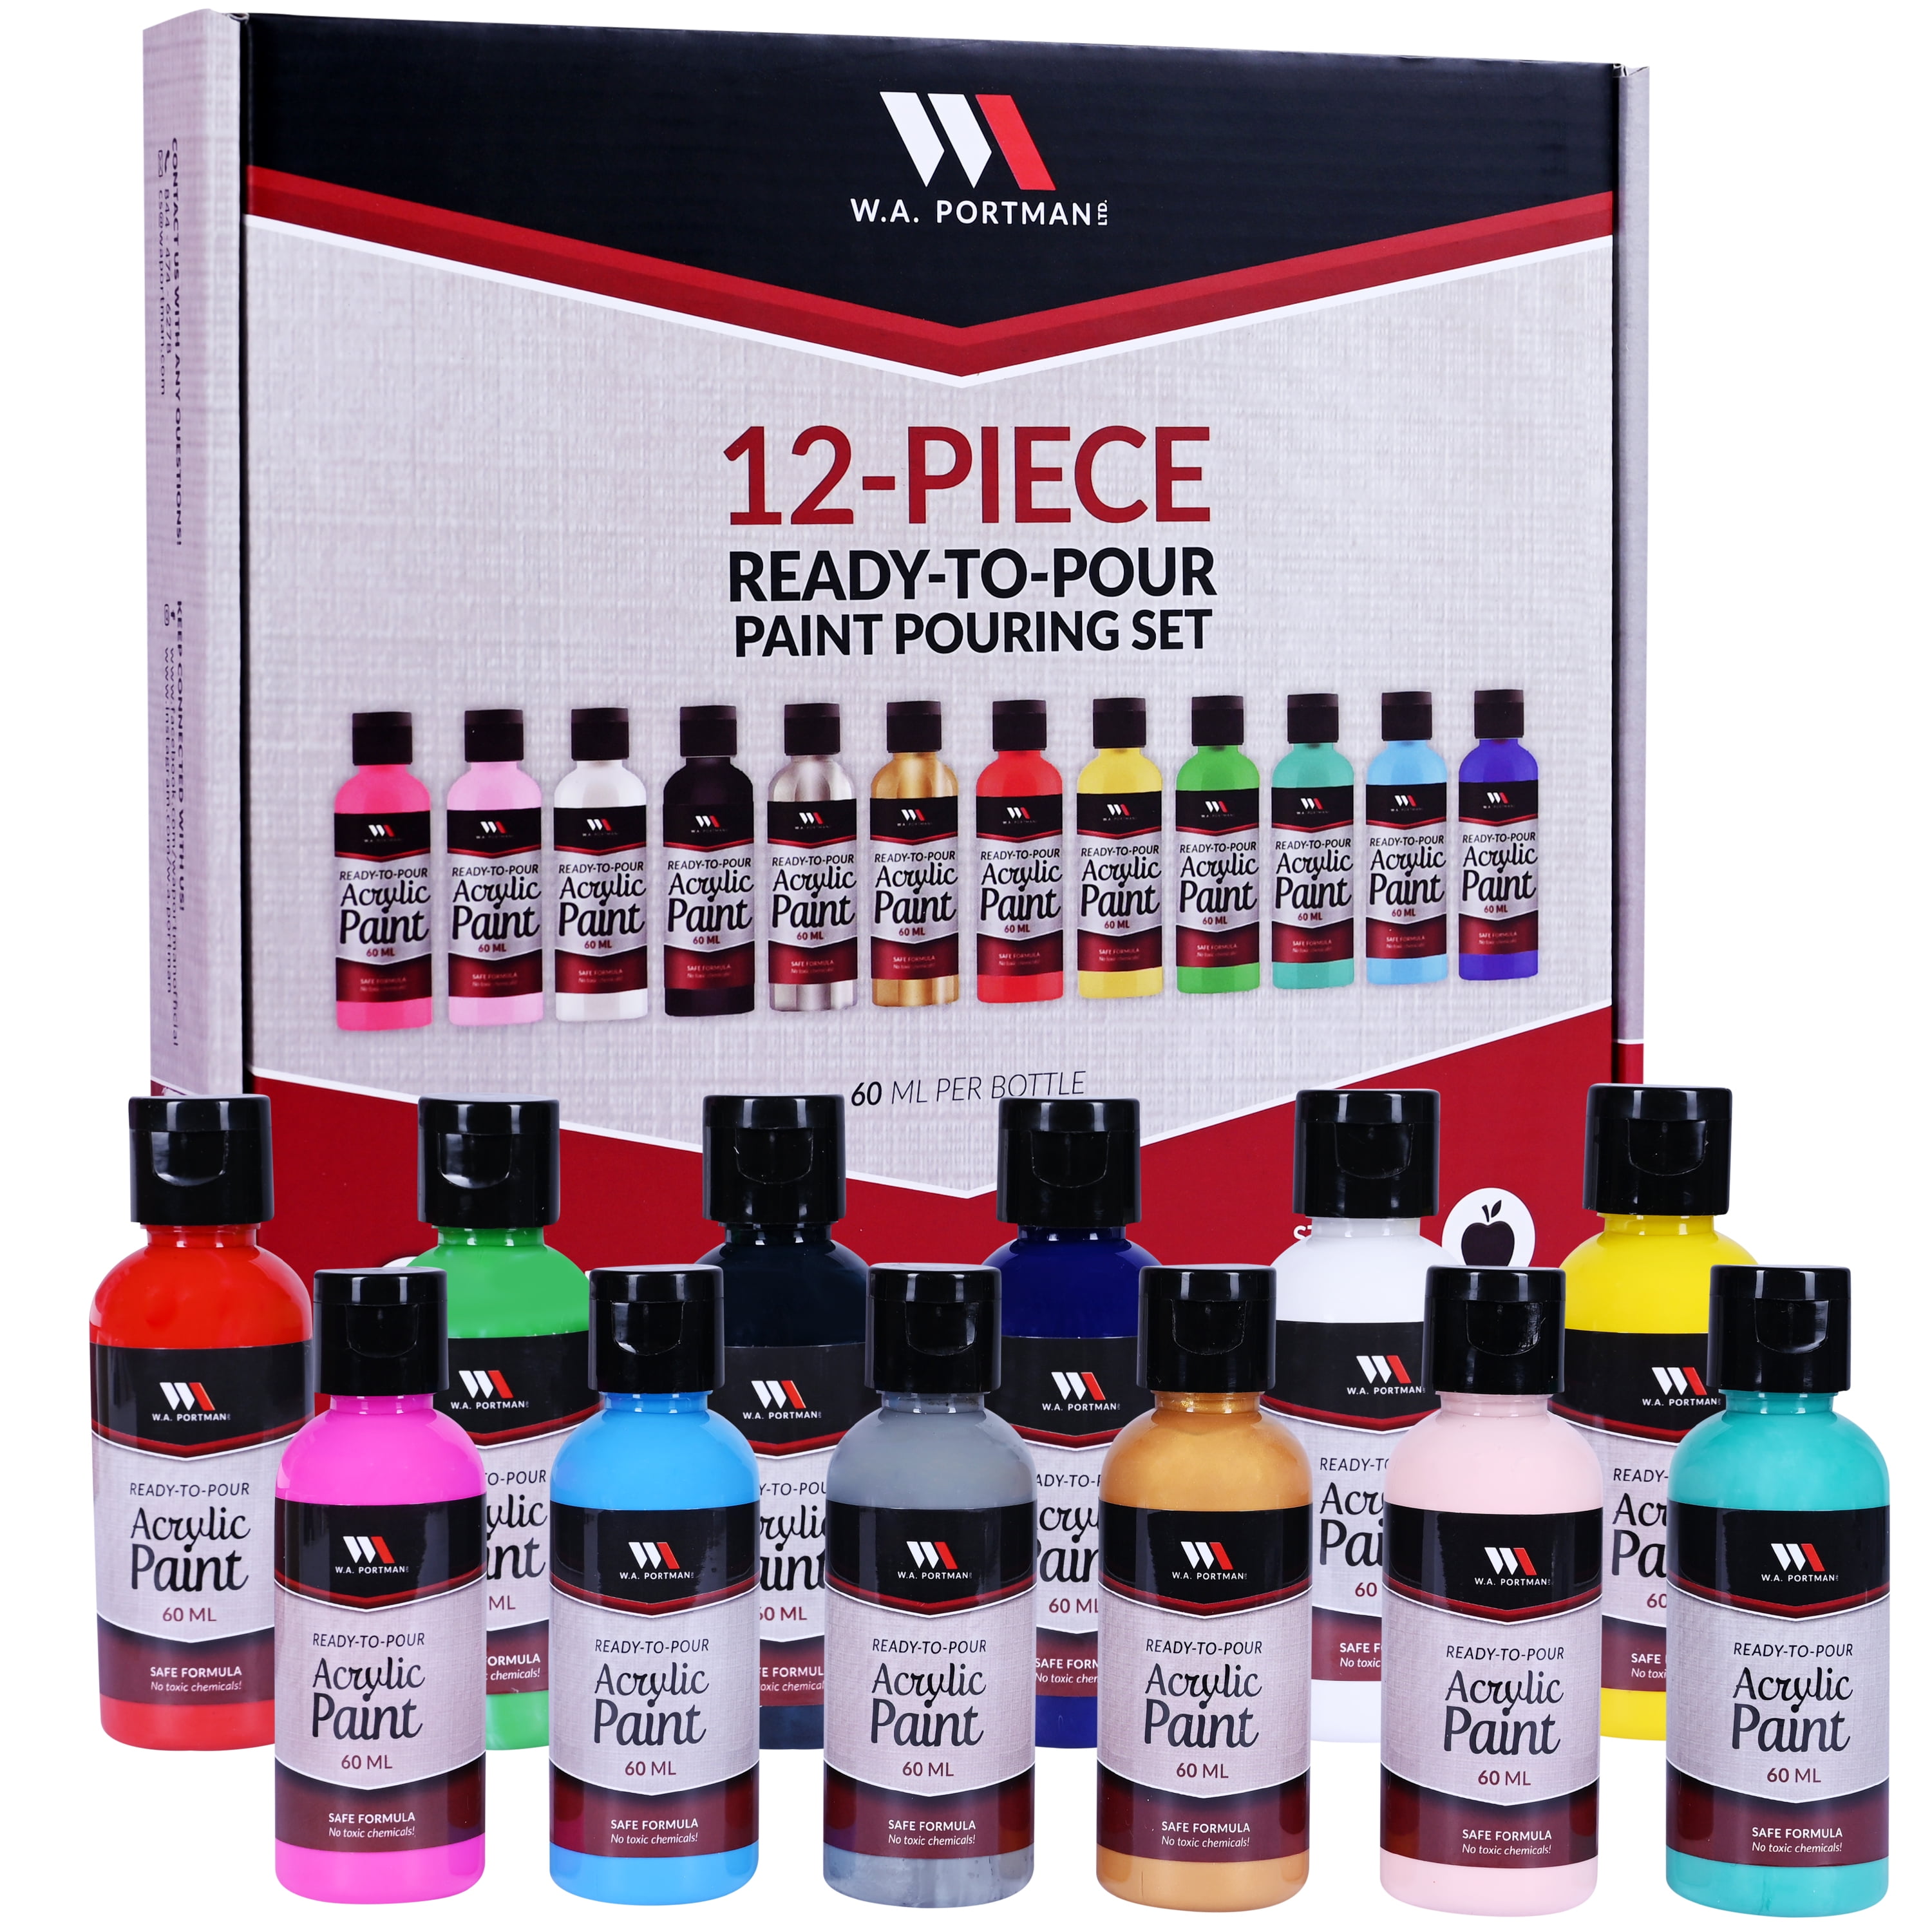  WA Portman 38 Pc Paint Pouring Kit with Silicone Oil for  Acrylic Pouring - Acrylic Pouring Paint Kit with 6 Bottles of Ready to Pour  Acrylic Pouring Paint - Pour Painting